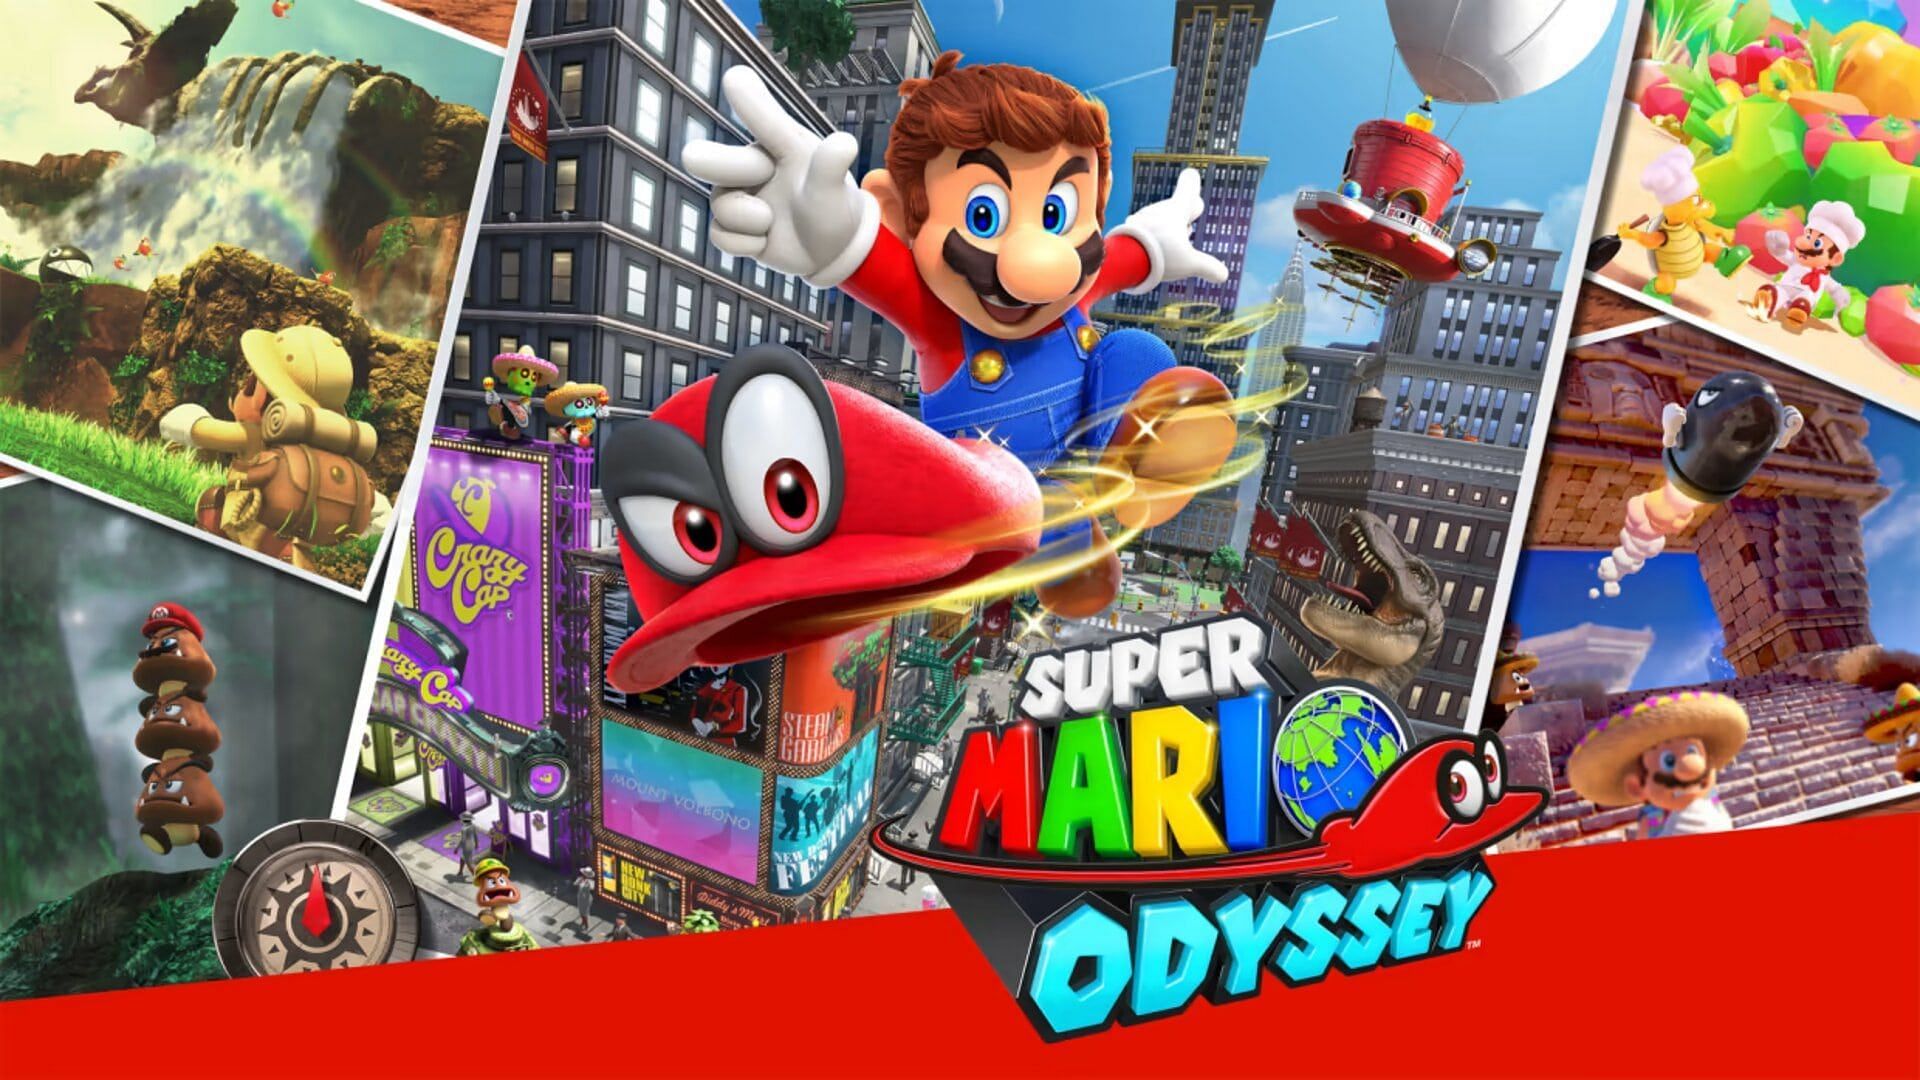 Super Mario Odyssey offers a fan-favorite 2.5D platformer that received universal critical acclaim and a fresh take on Mario gameplay. (Image via Nintendo)